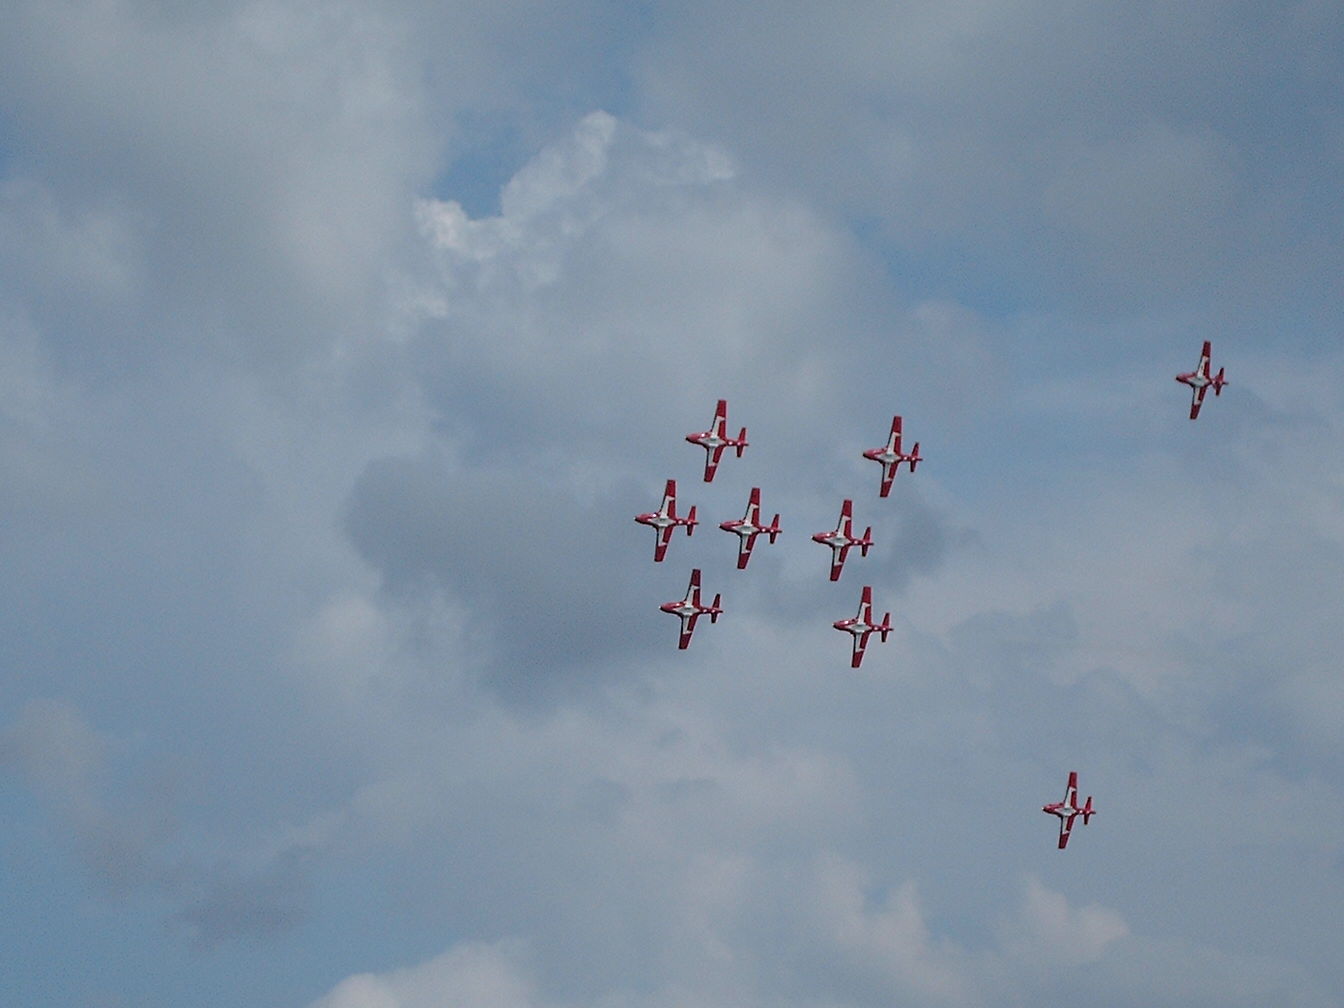 Canadian Snowbirds in Swept 7 formation with two trailing
Video: http://s18.photobucket.com/albums/b111/Quickster93/Wings%20over%20Houston/?action=vie